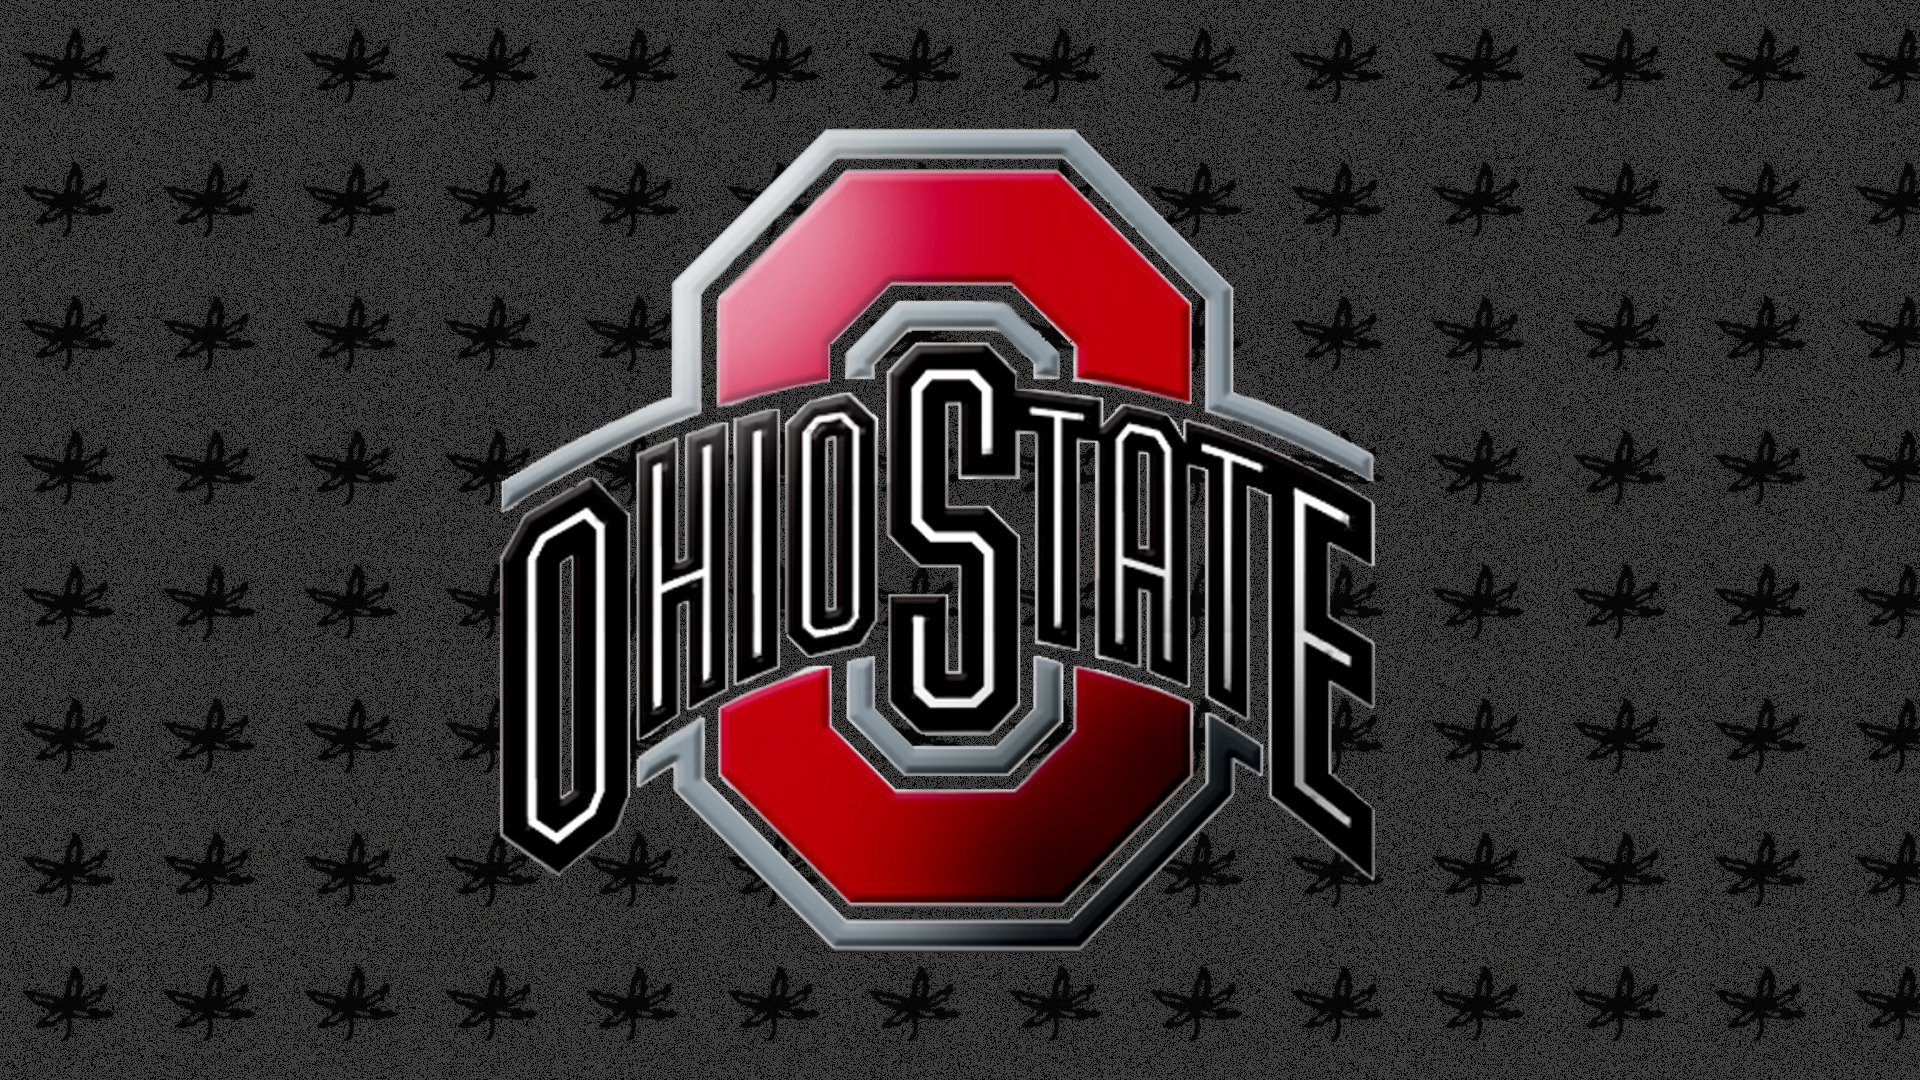  swagg university ohio state image swagg university ohio state pictures 1920x1080